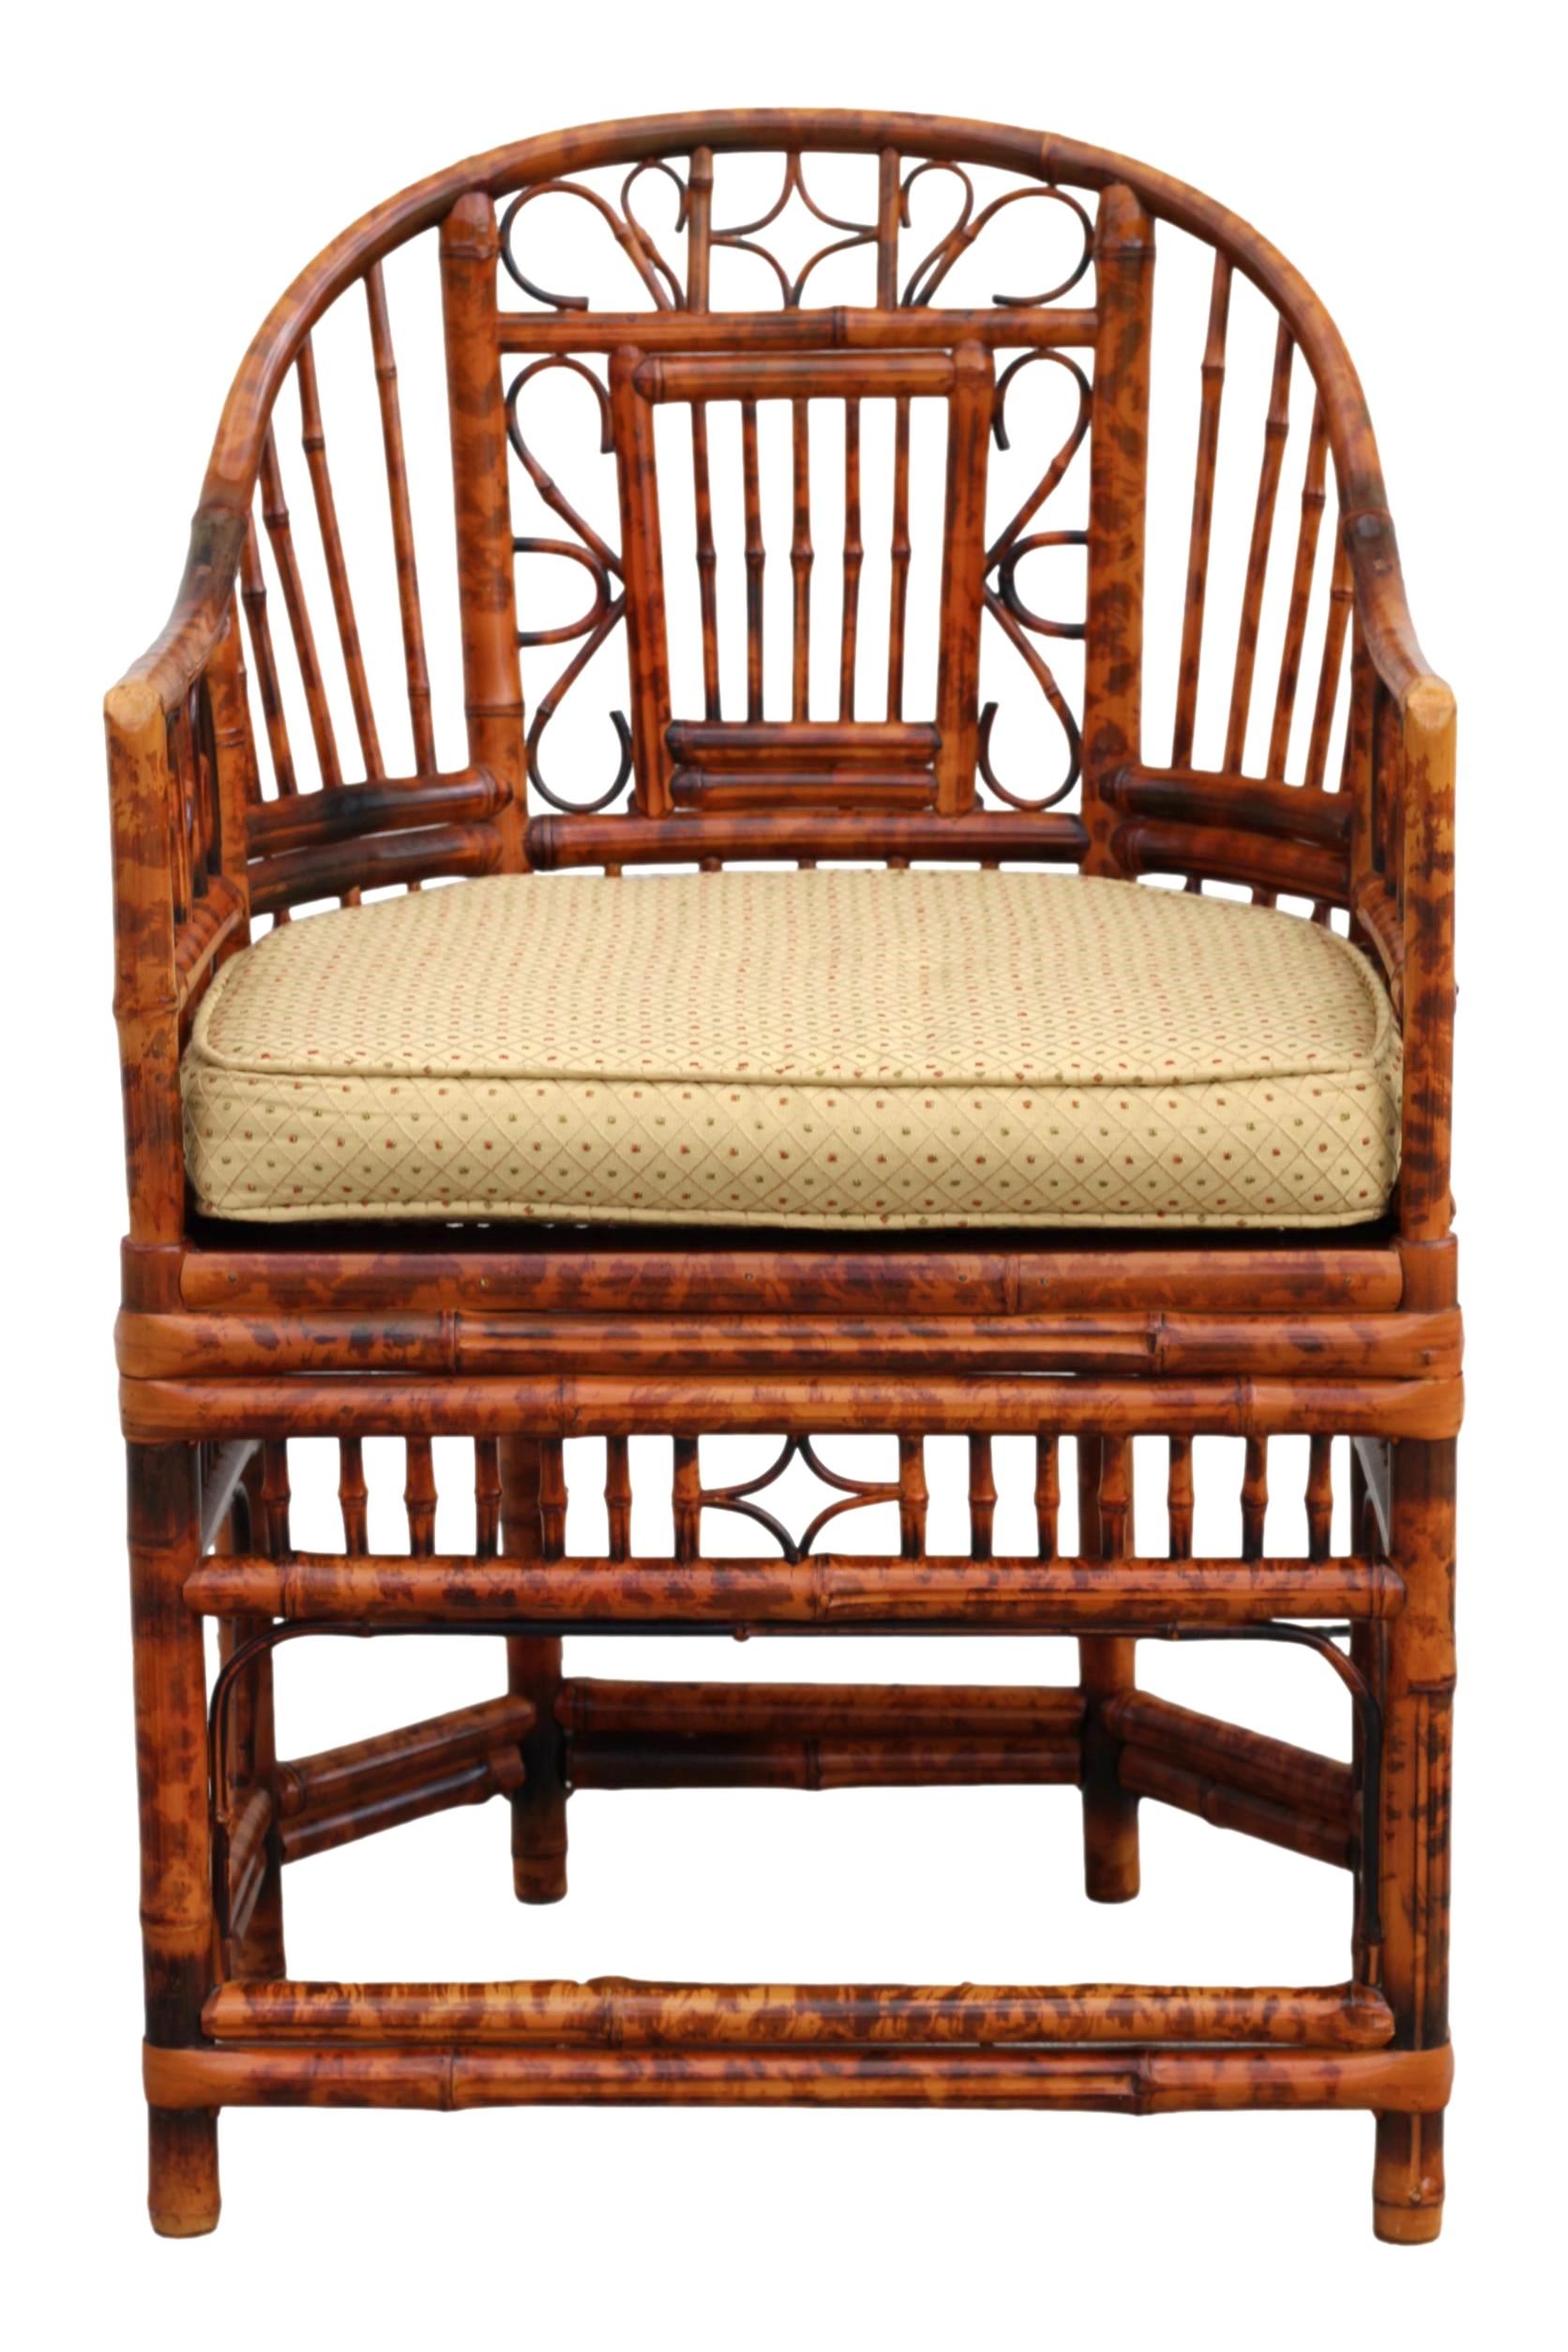 Stunning pair of burnt bamboo armchairs with gracefully shaped horseshoe frames, in the Brighton Pavilion style. These Chinese Chippendale chairs feature a beautiful tortoiseshell finish, caned-bottom seats, and intricate bamboo open fretwork. Loose